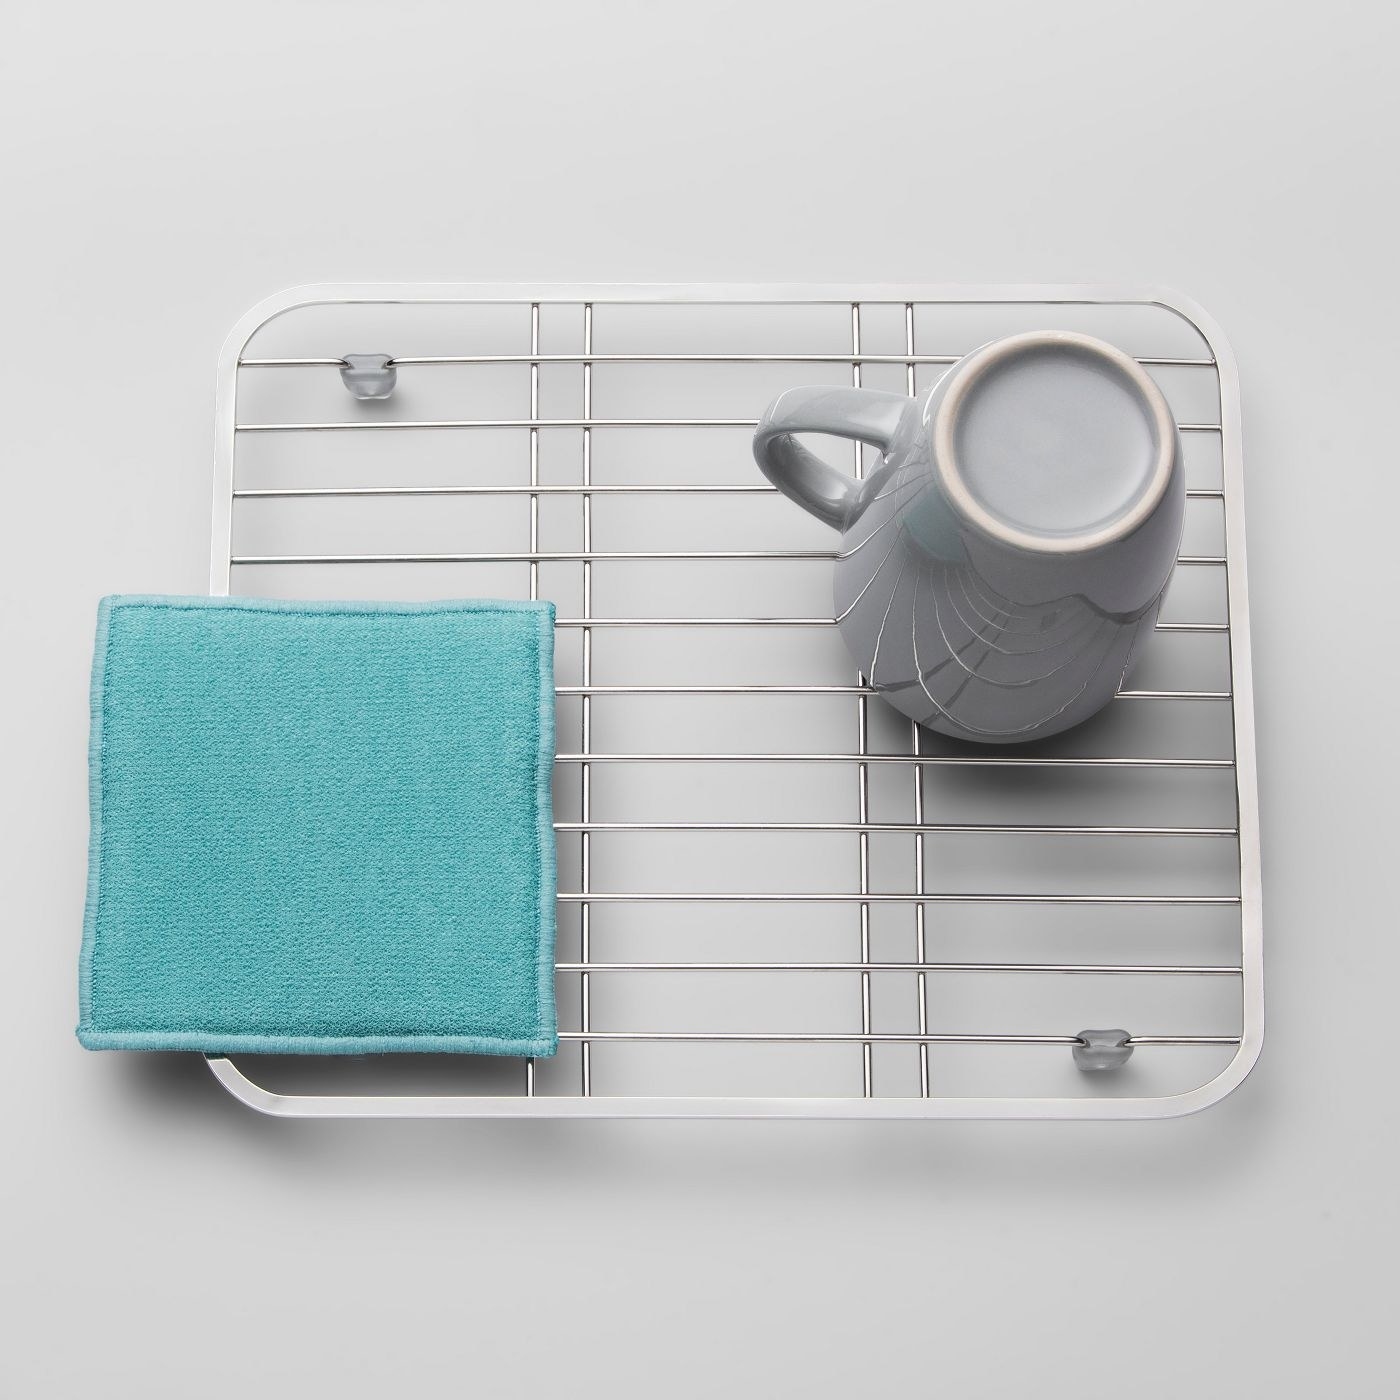 The dish rack with a towel and a cup on it